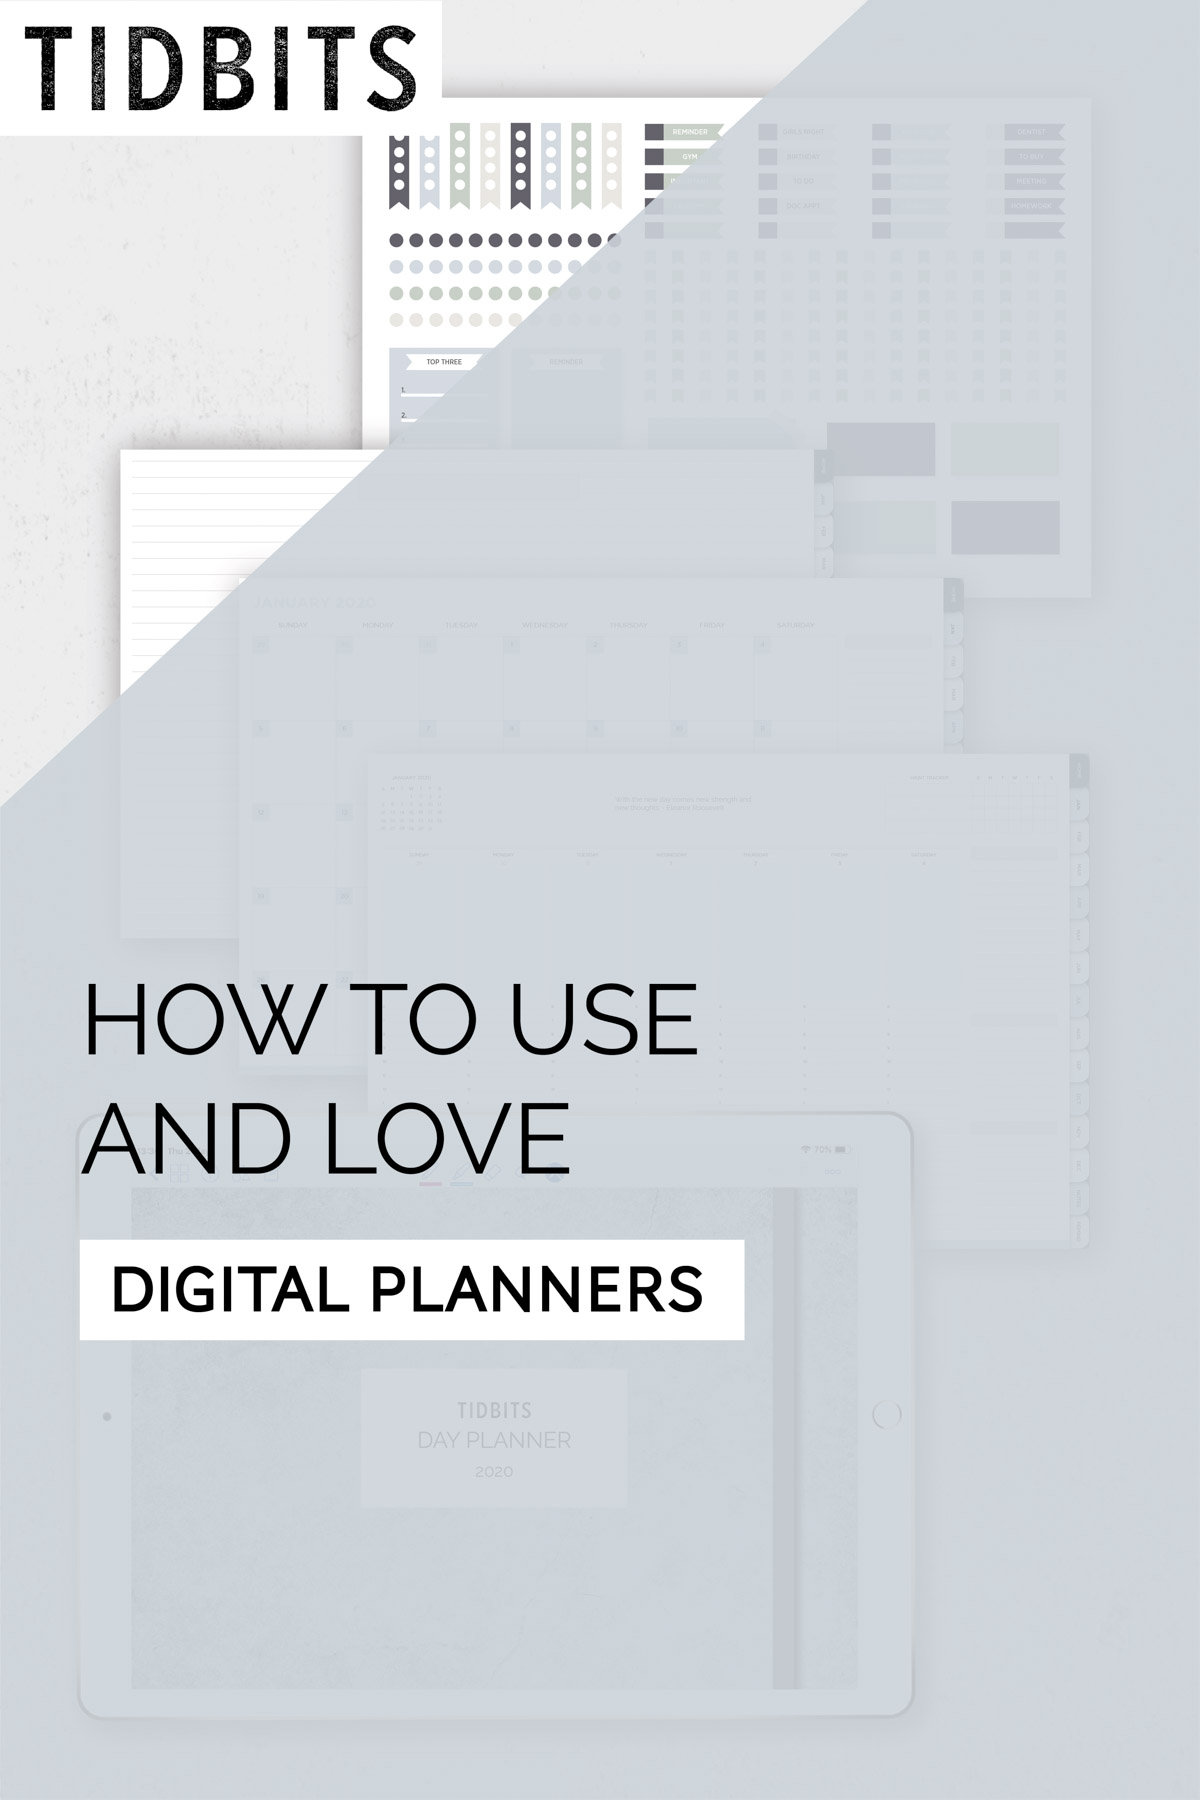 How to use and love digital planners